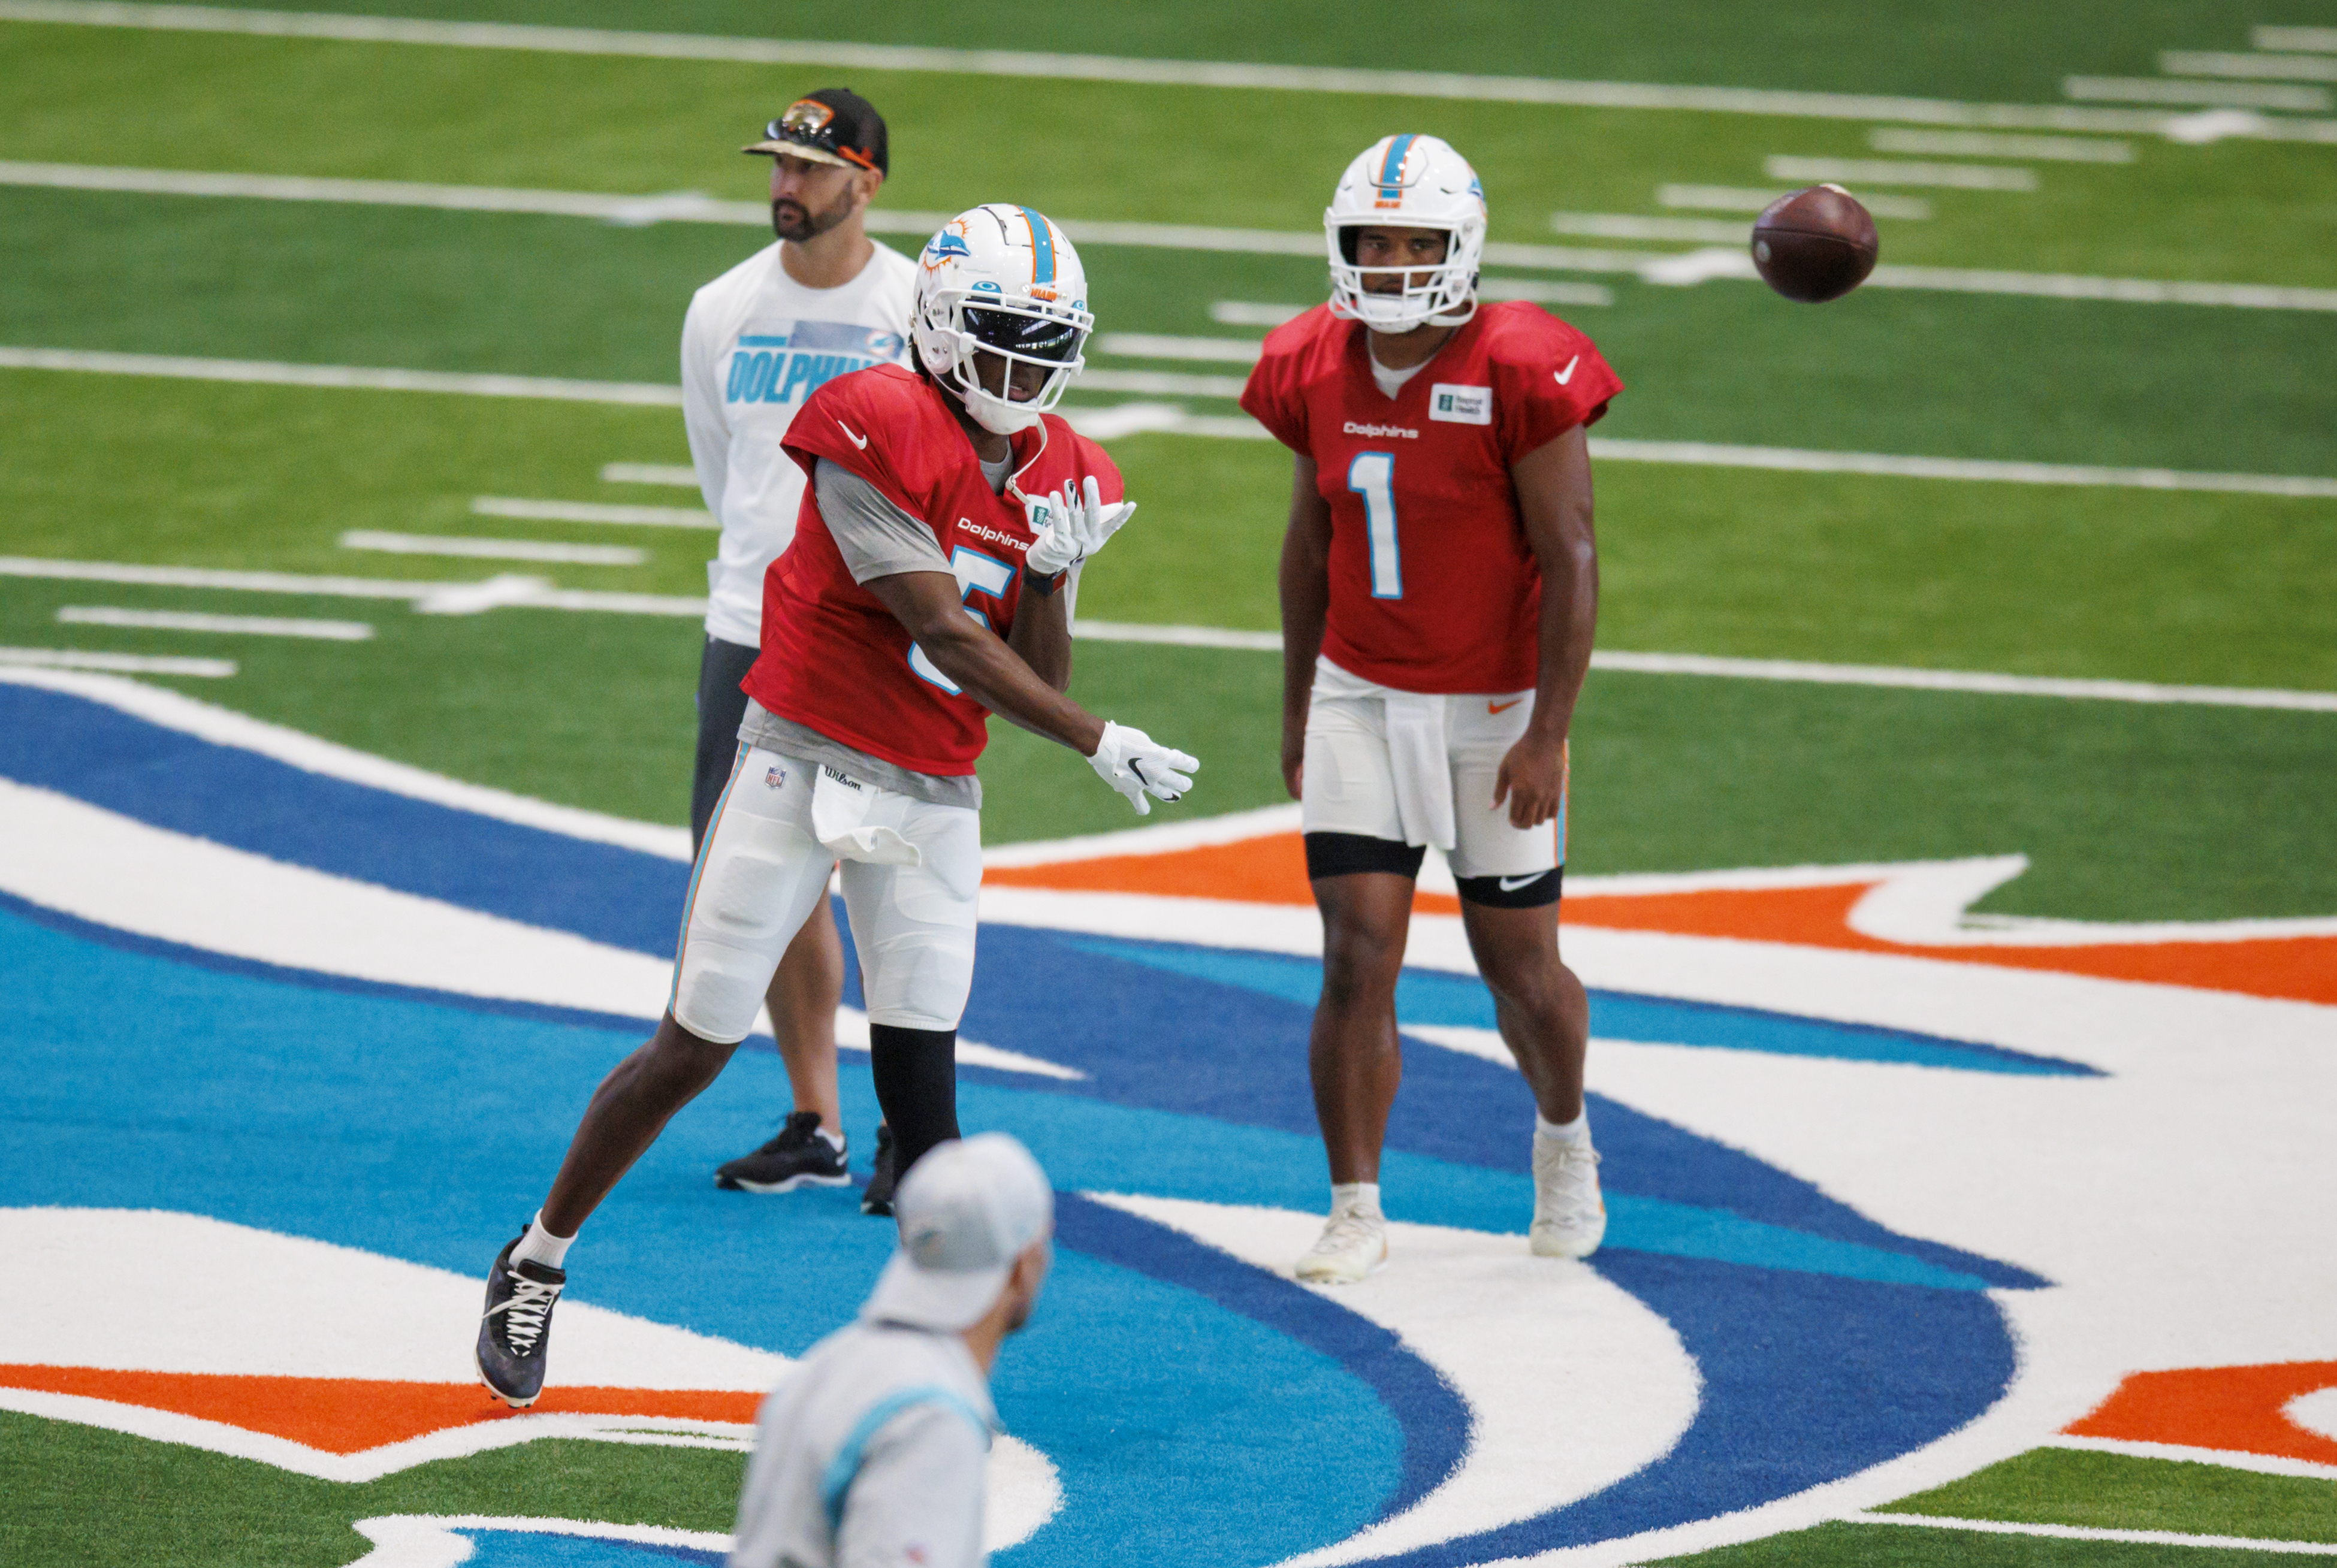 Dolphins All-22 Film Review: What is Miami Getting With Teddy Bridgewater?